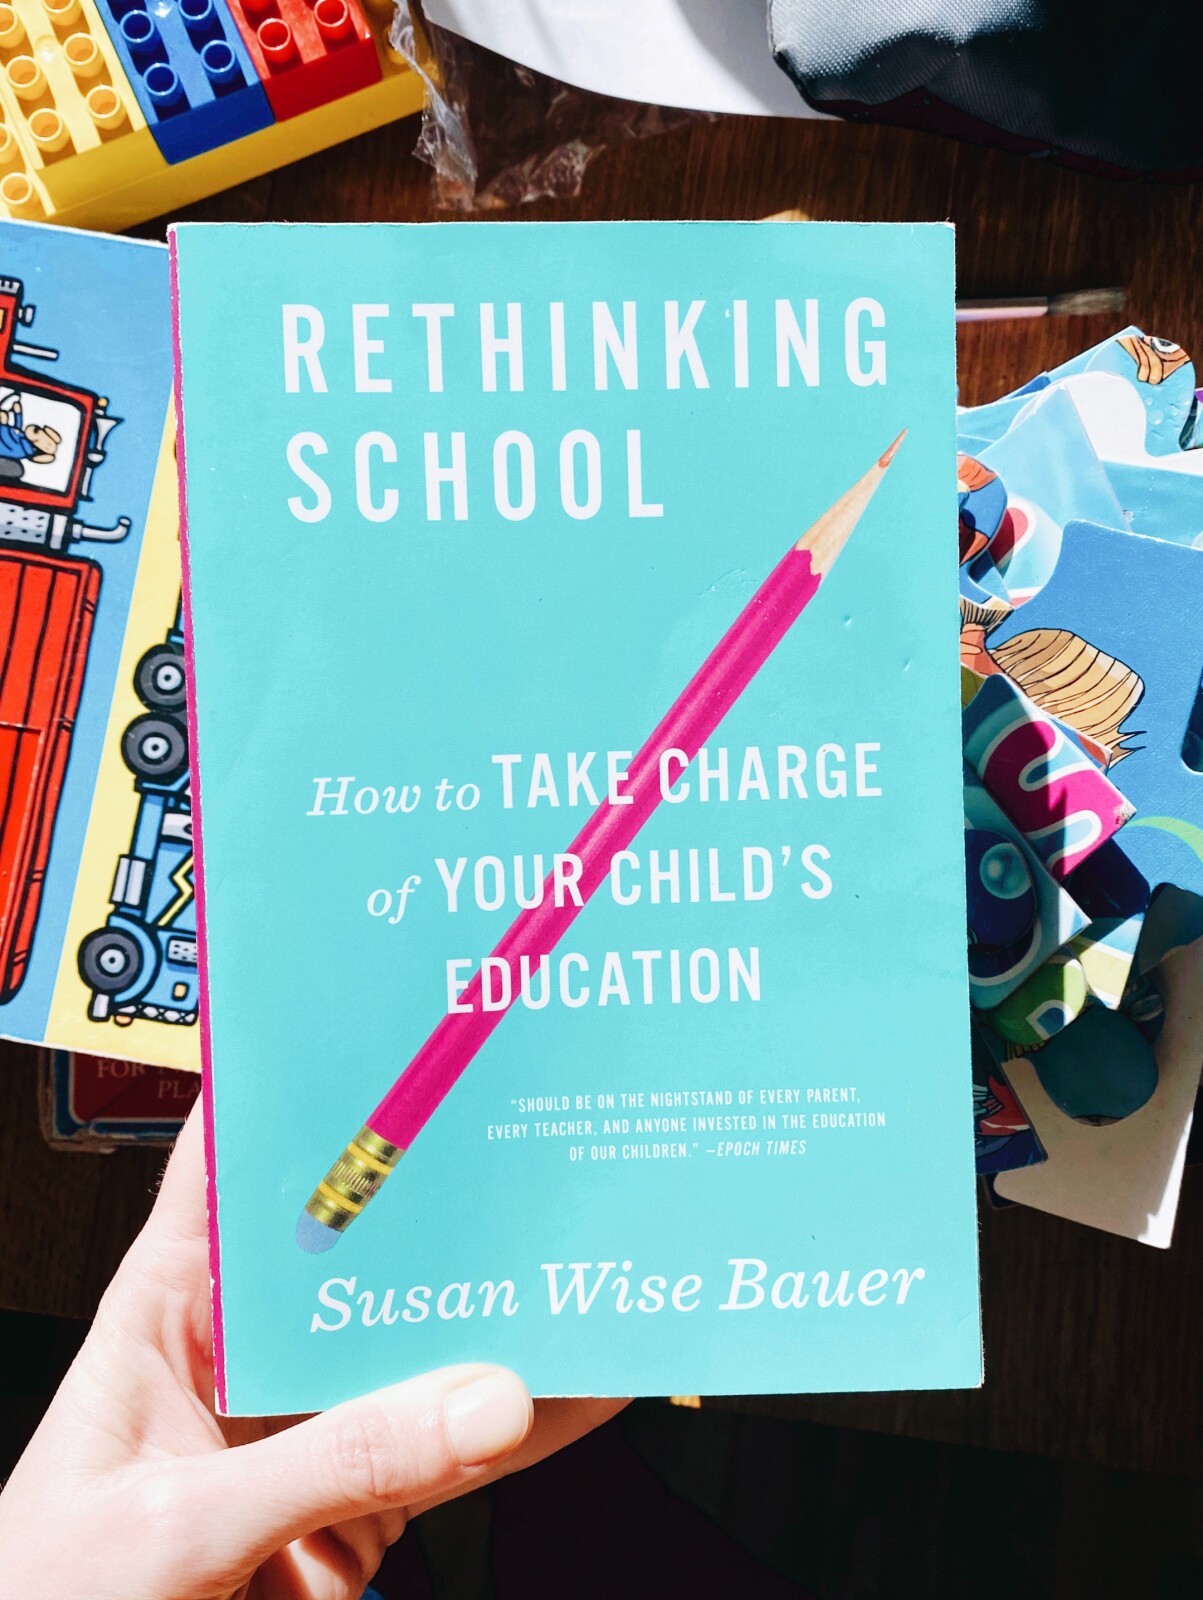 How to Be Empowered to Rethink School